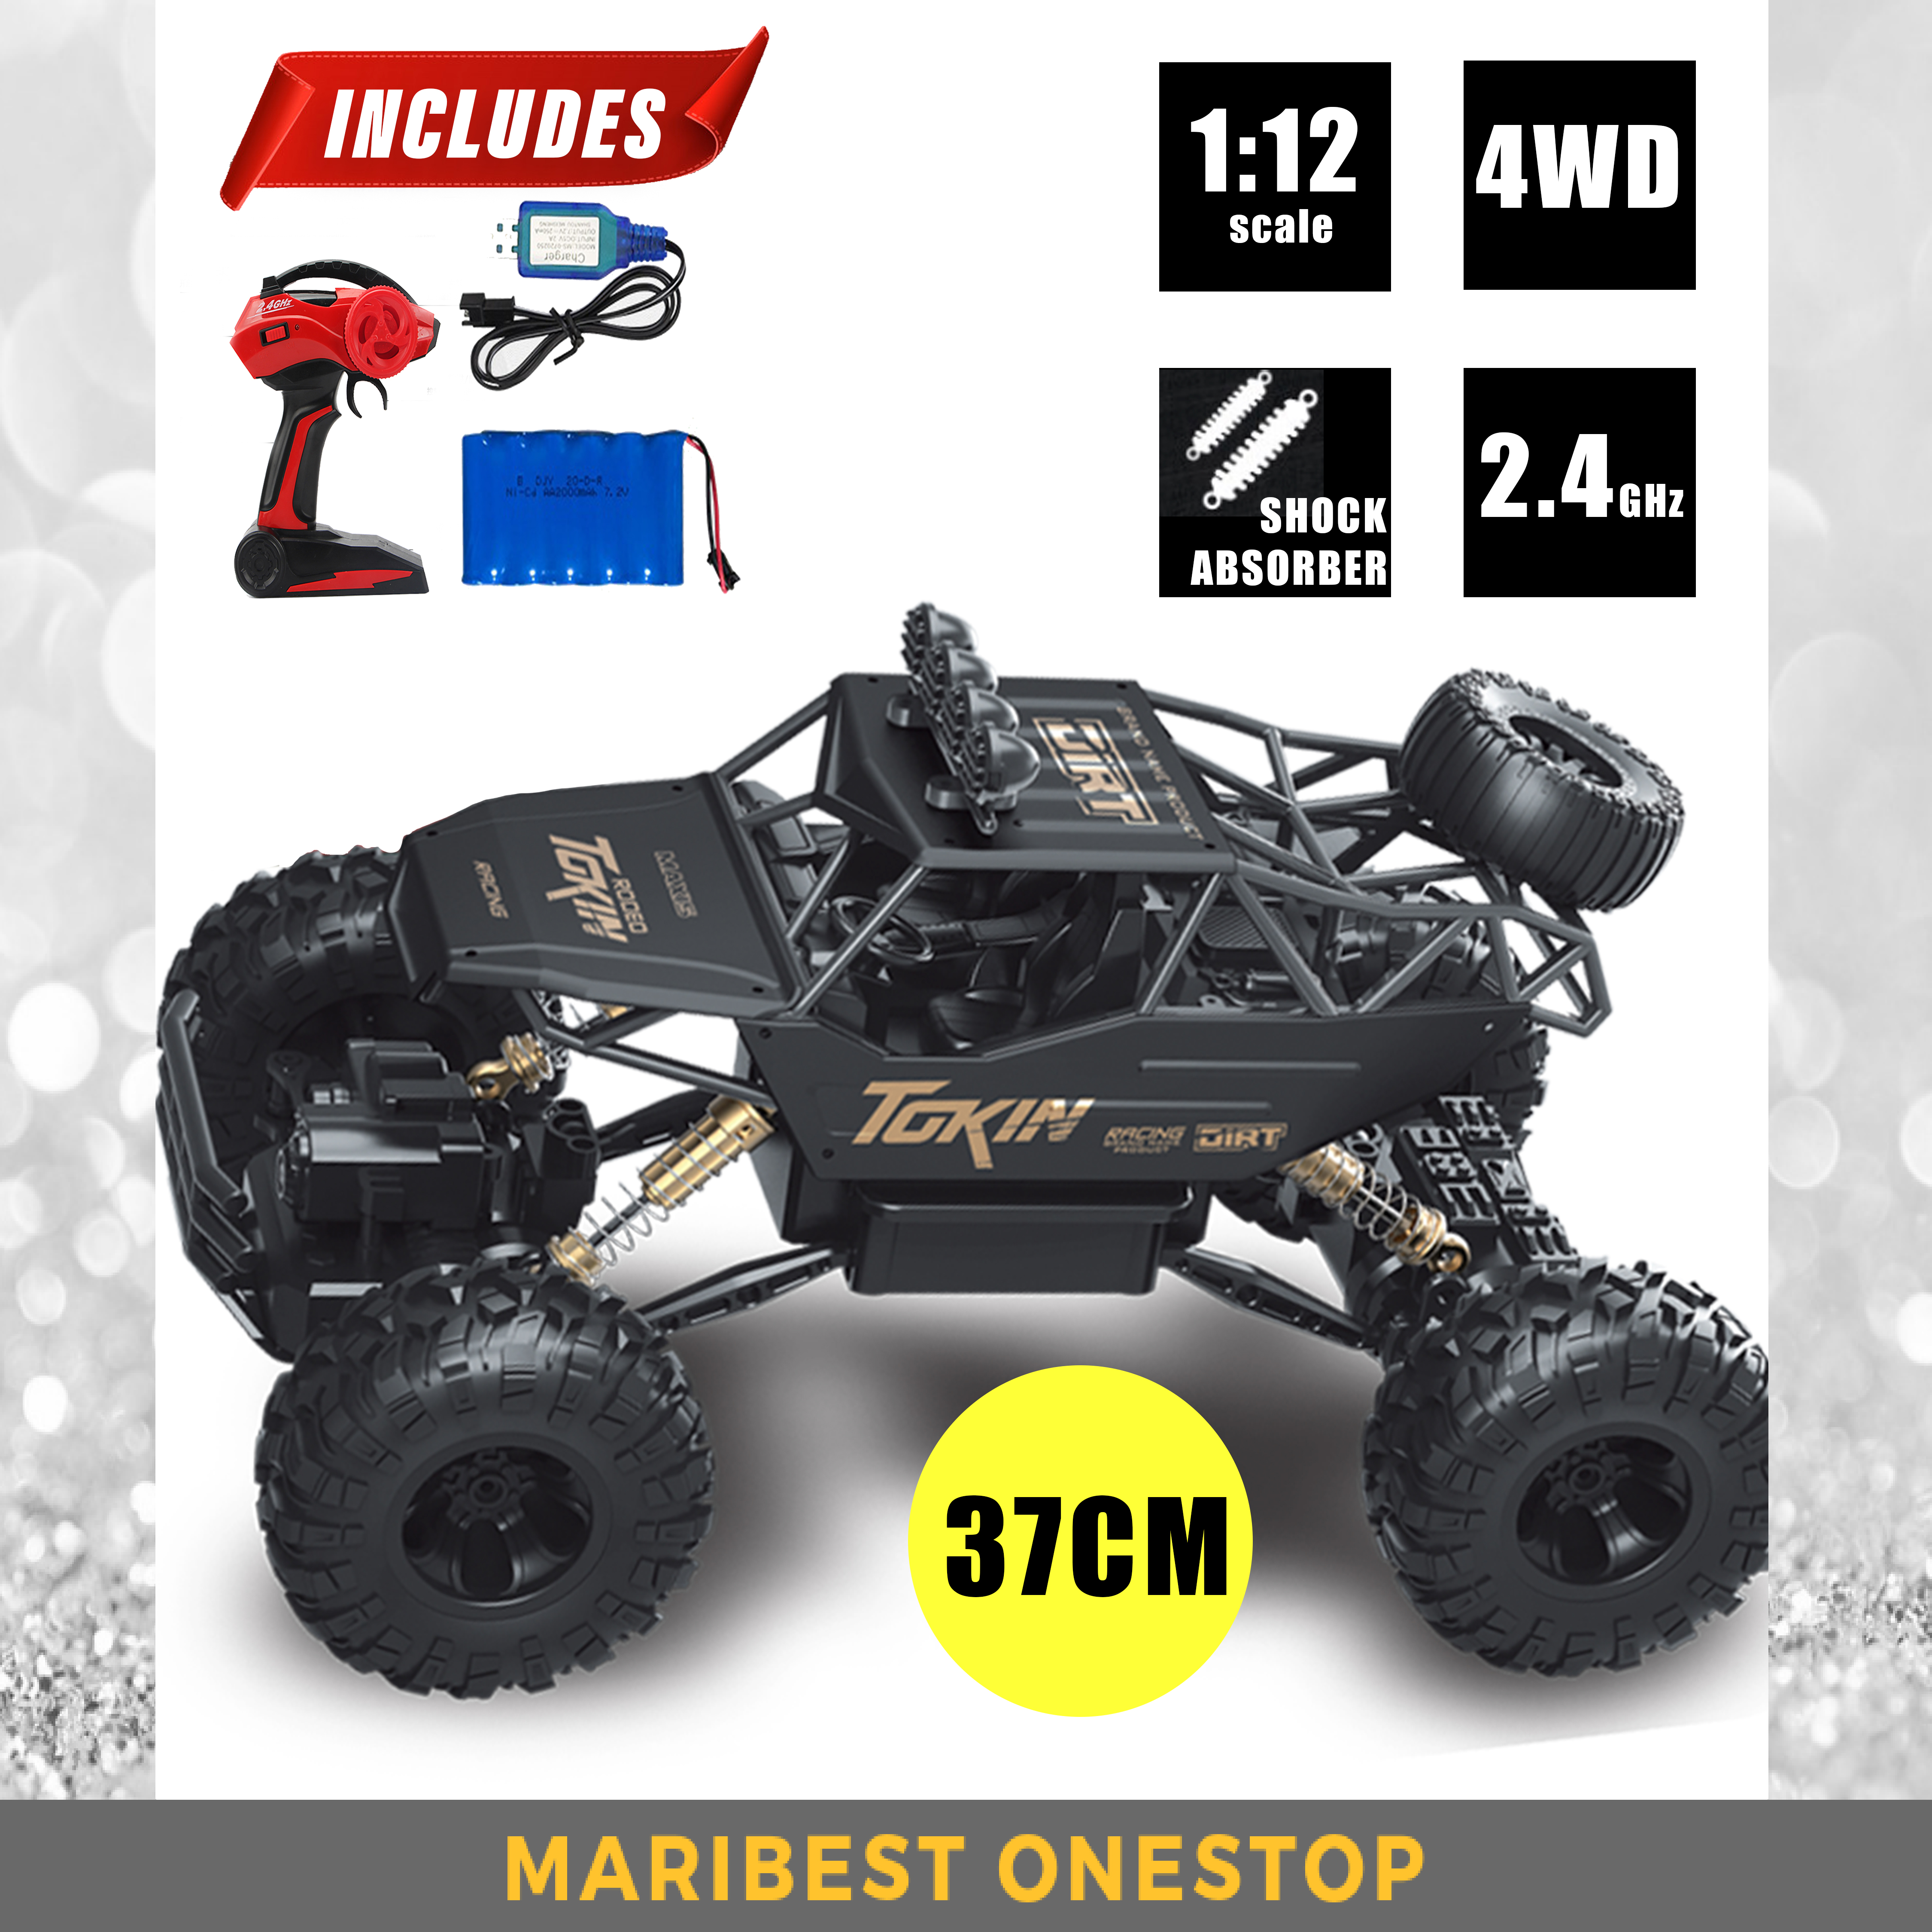 6026 Rock Crawler Vehicles High quality RC Car 1:12 Scale Remote Control Off-Road 37CM 